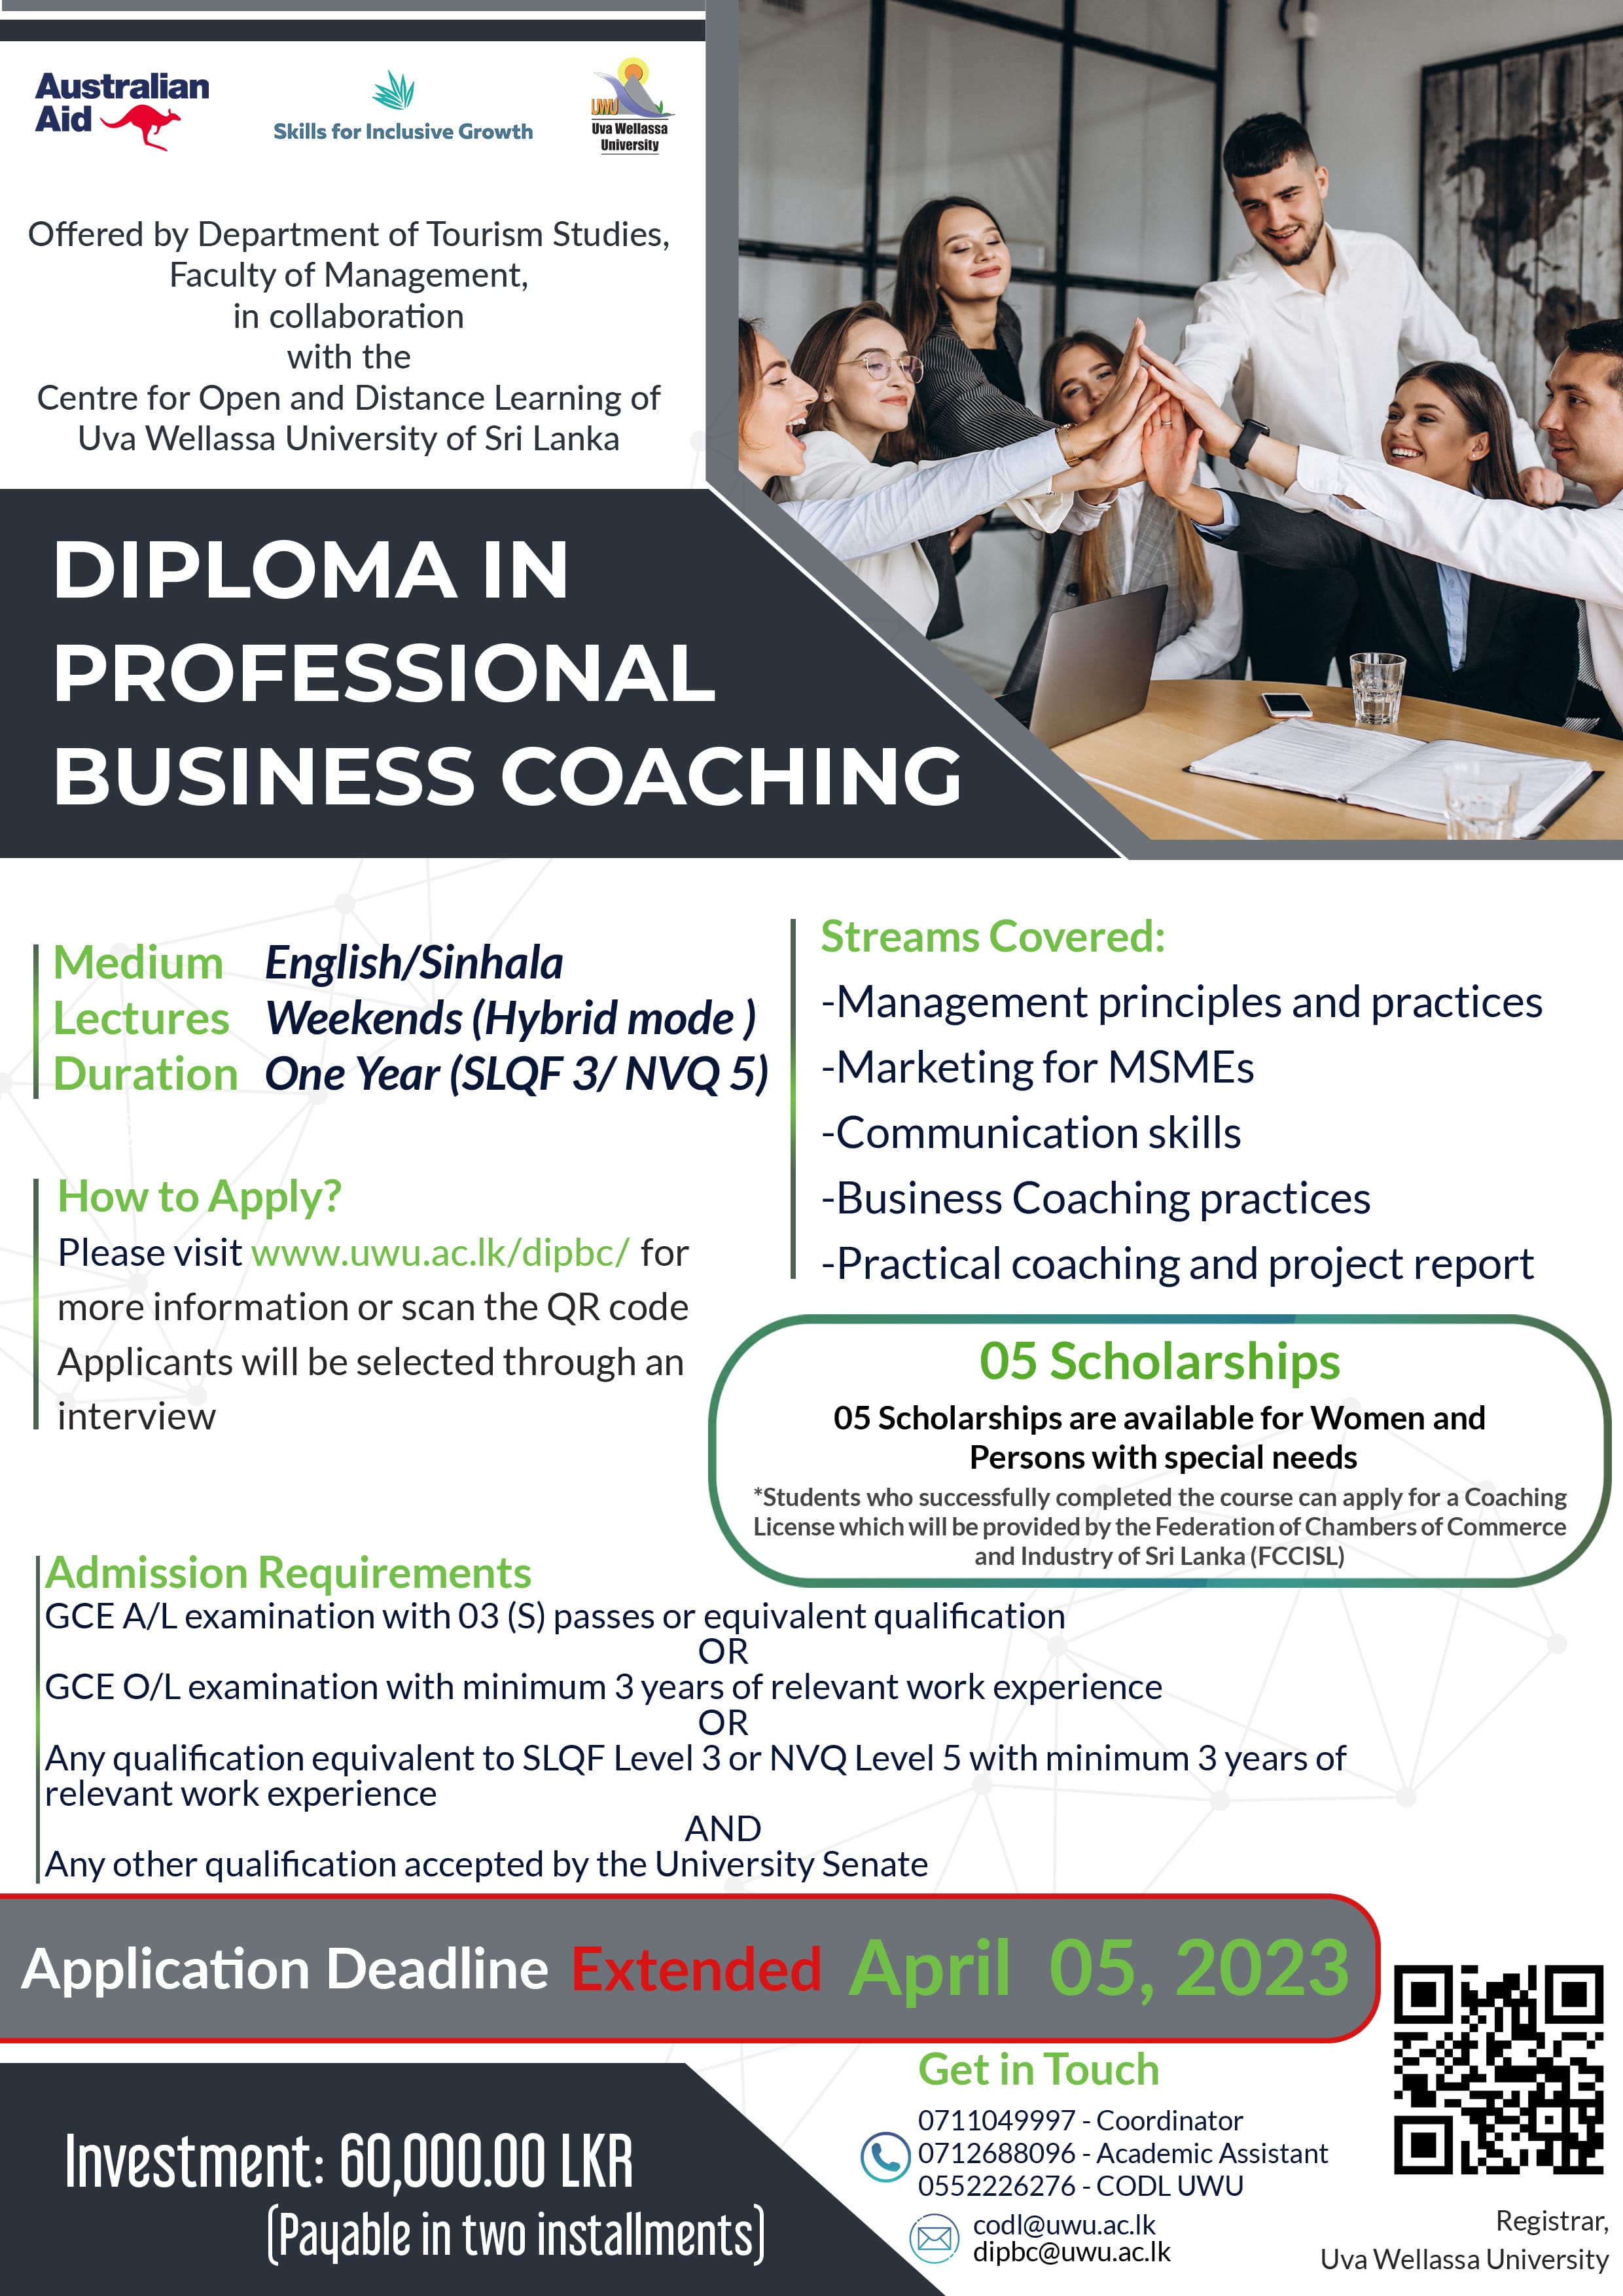 Diploma in Professional Business Coaching